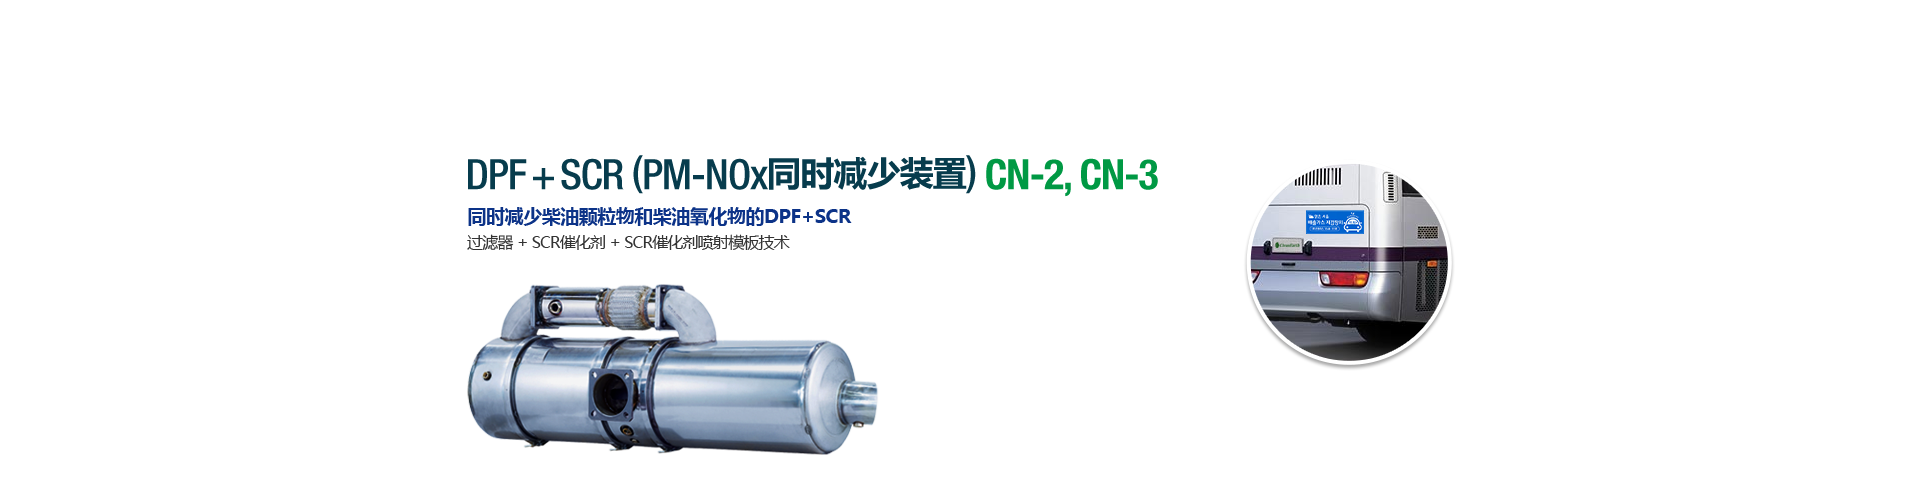 DPF+SCR for MDV and HDV CN-2, CN-3